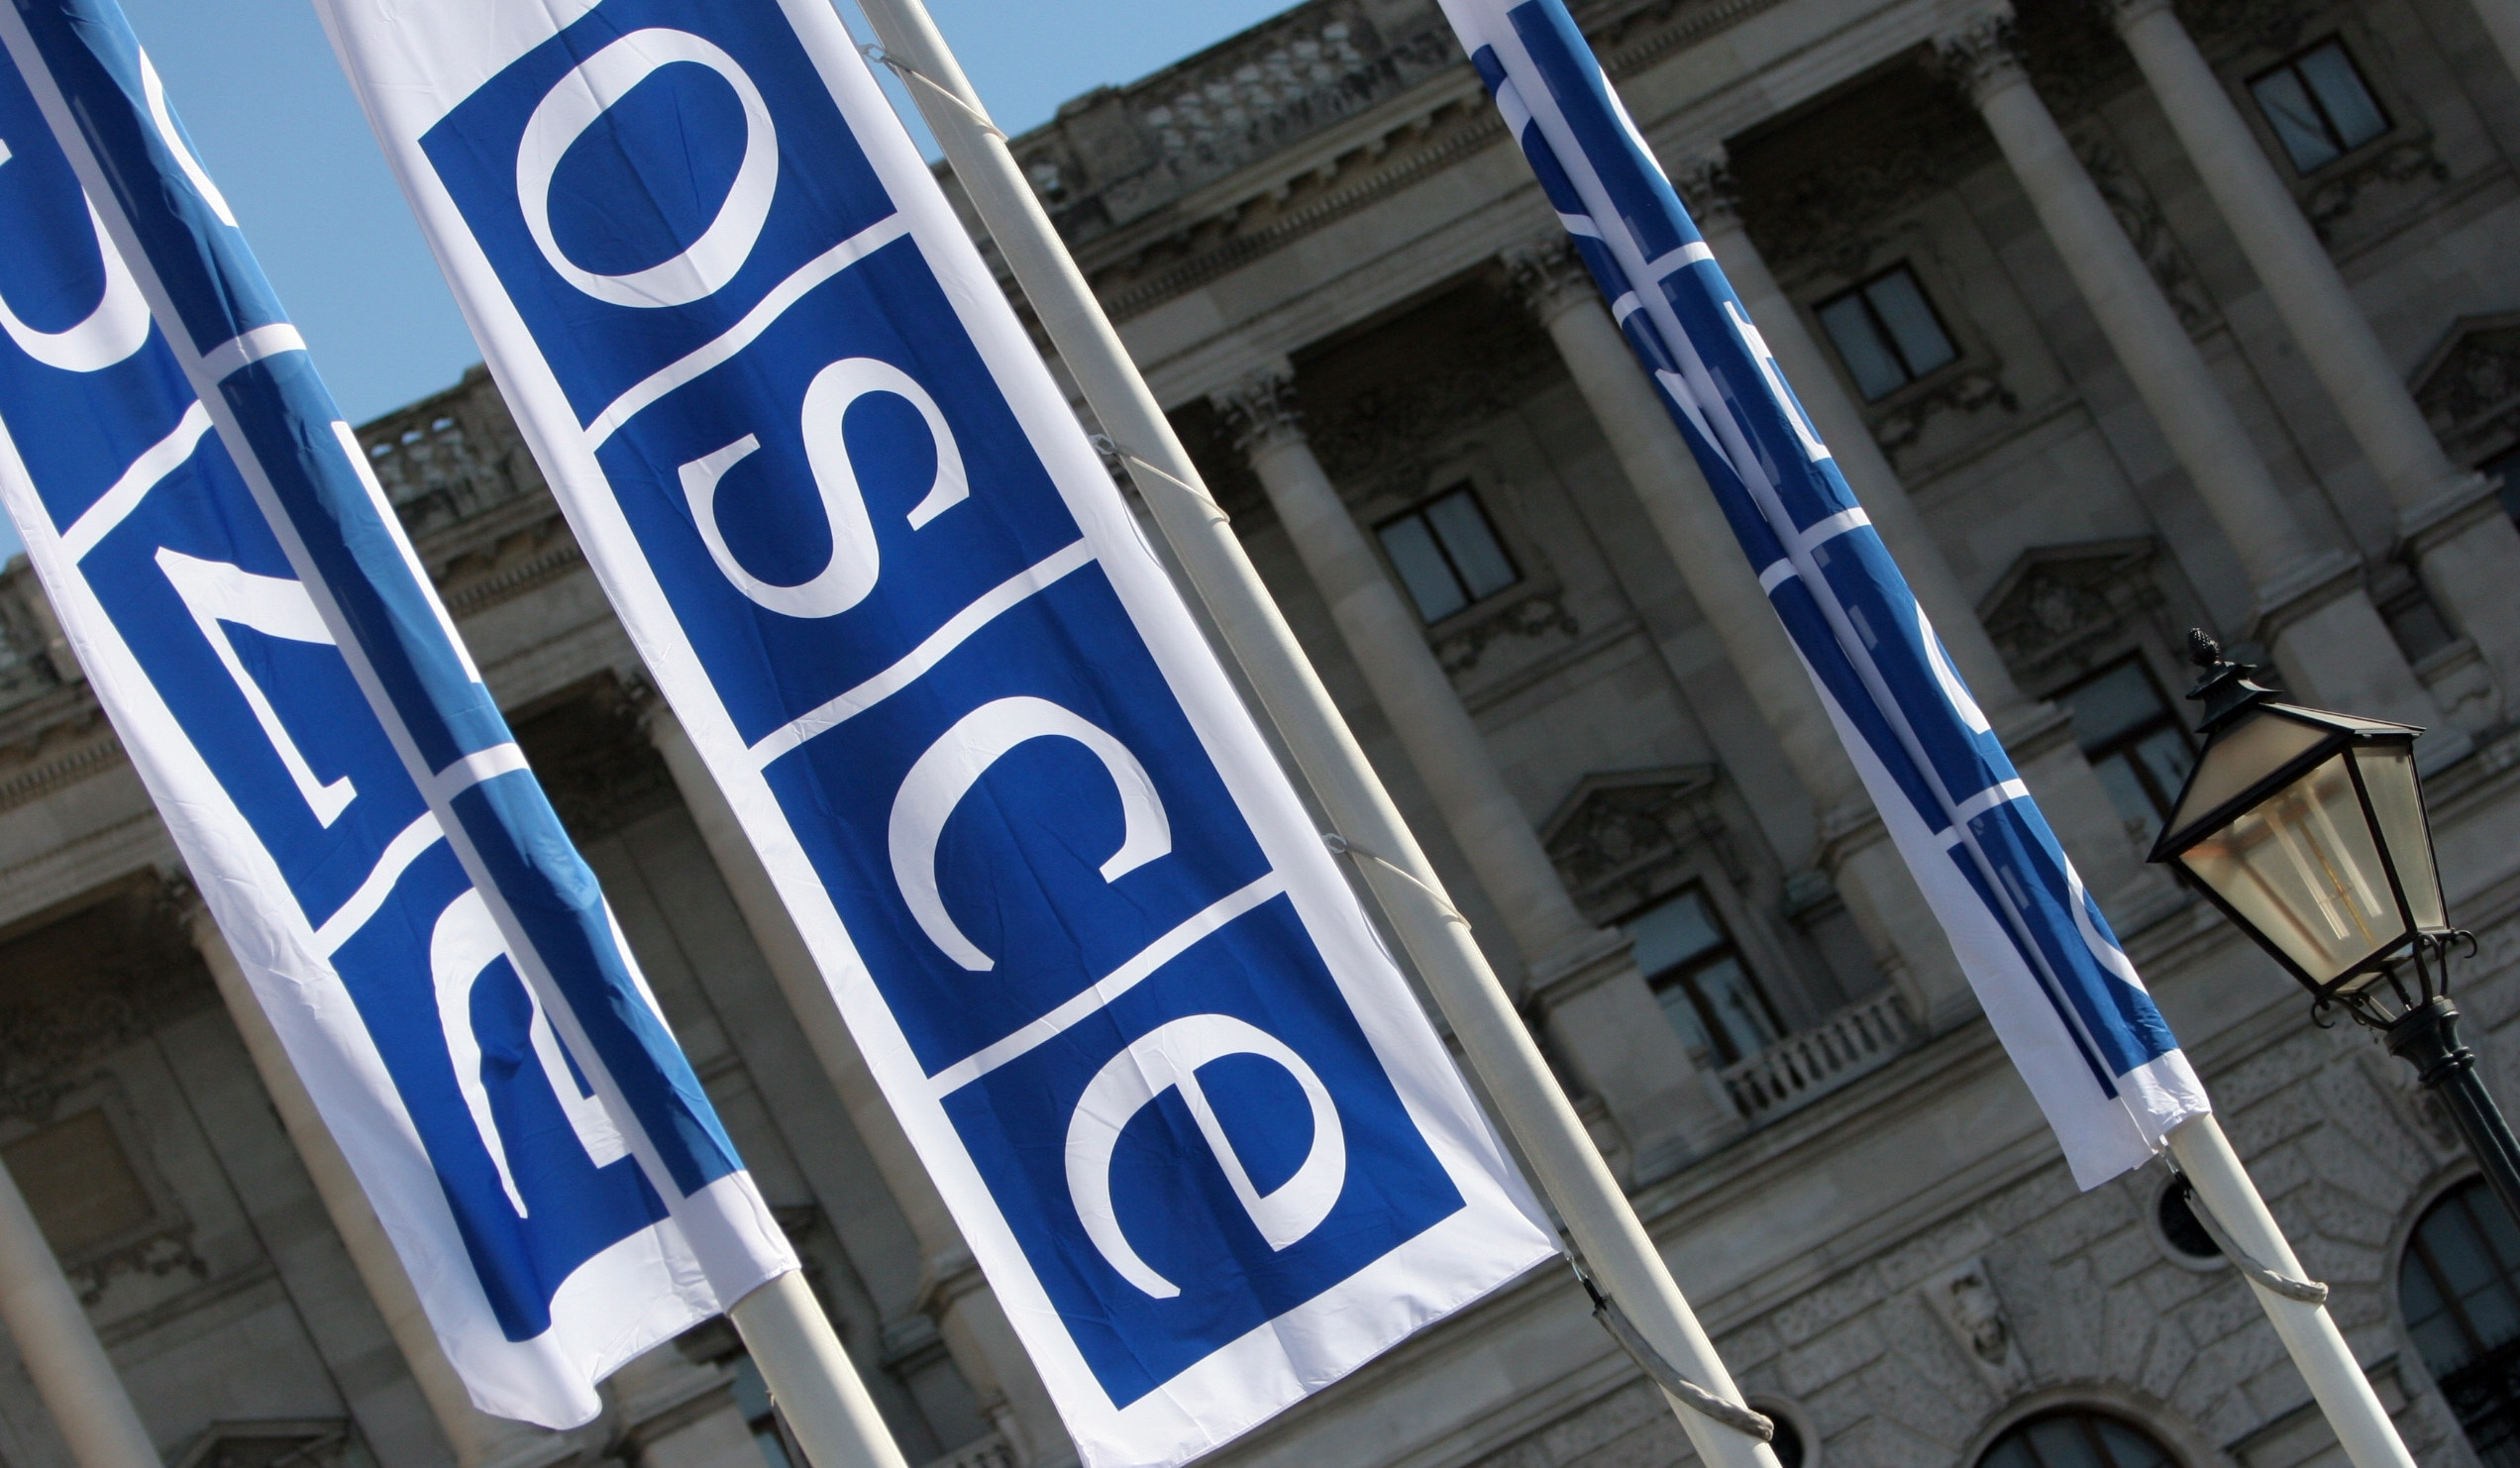 OSCE Chairman-in-Office Osmani calls for constructive dialogue in talks with Ministers of Foreign Affairs of Armenia and Azerbaijan